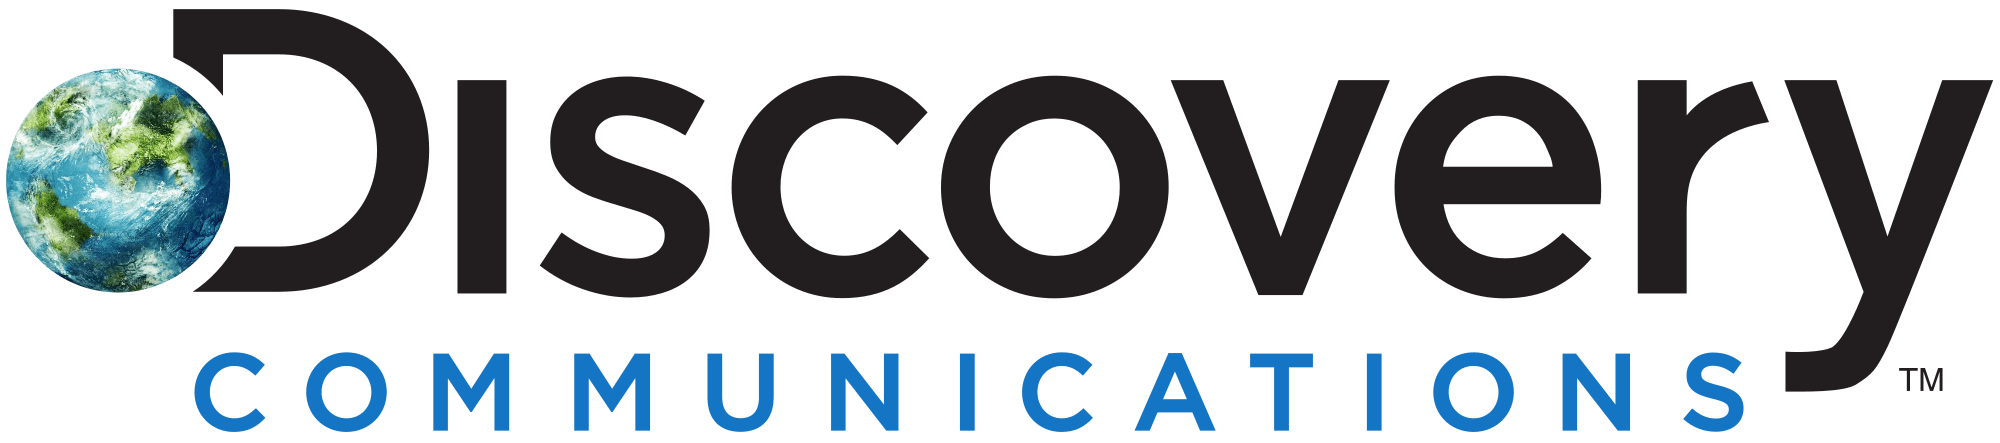 Discovery Communications Logo - Discovery Communications Competitors, Revenue and Employees